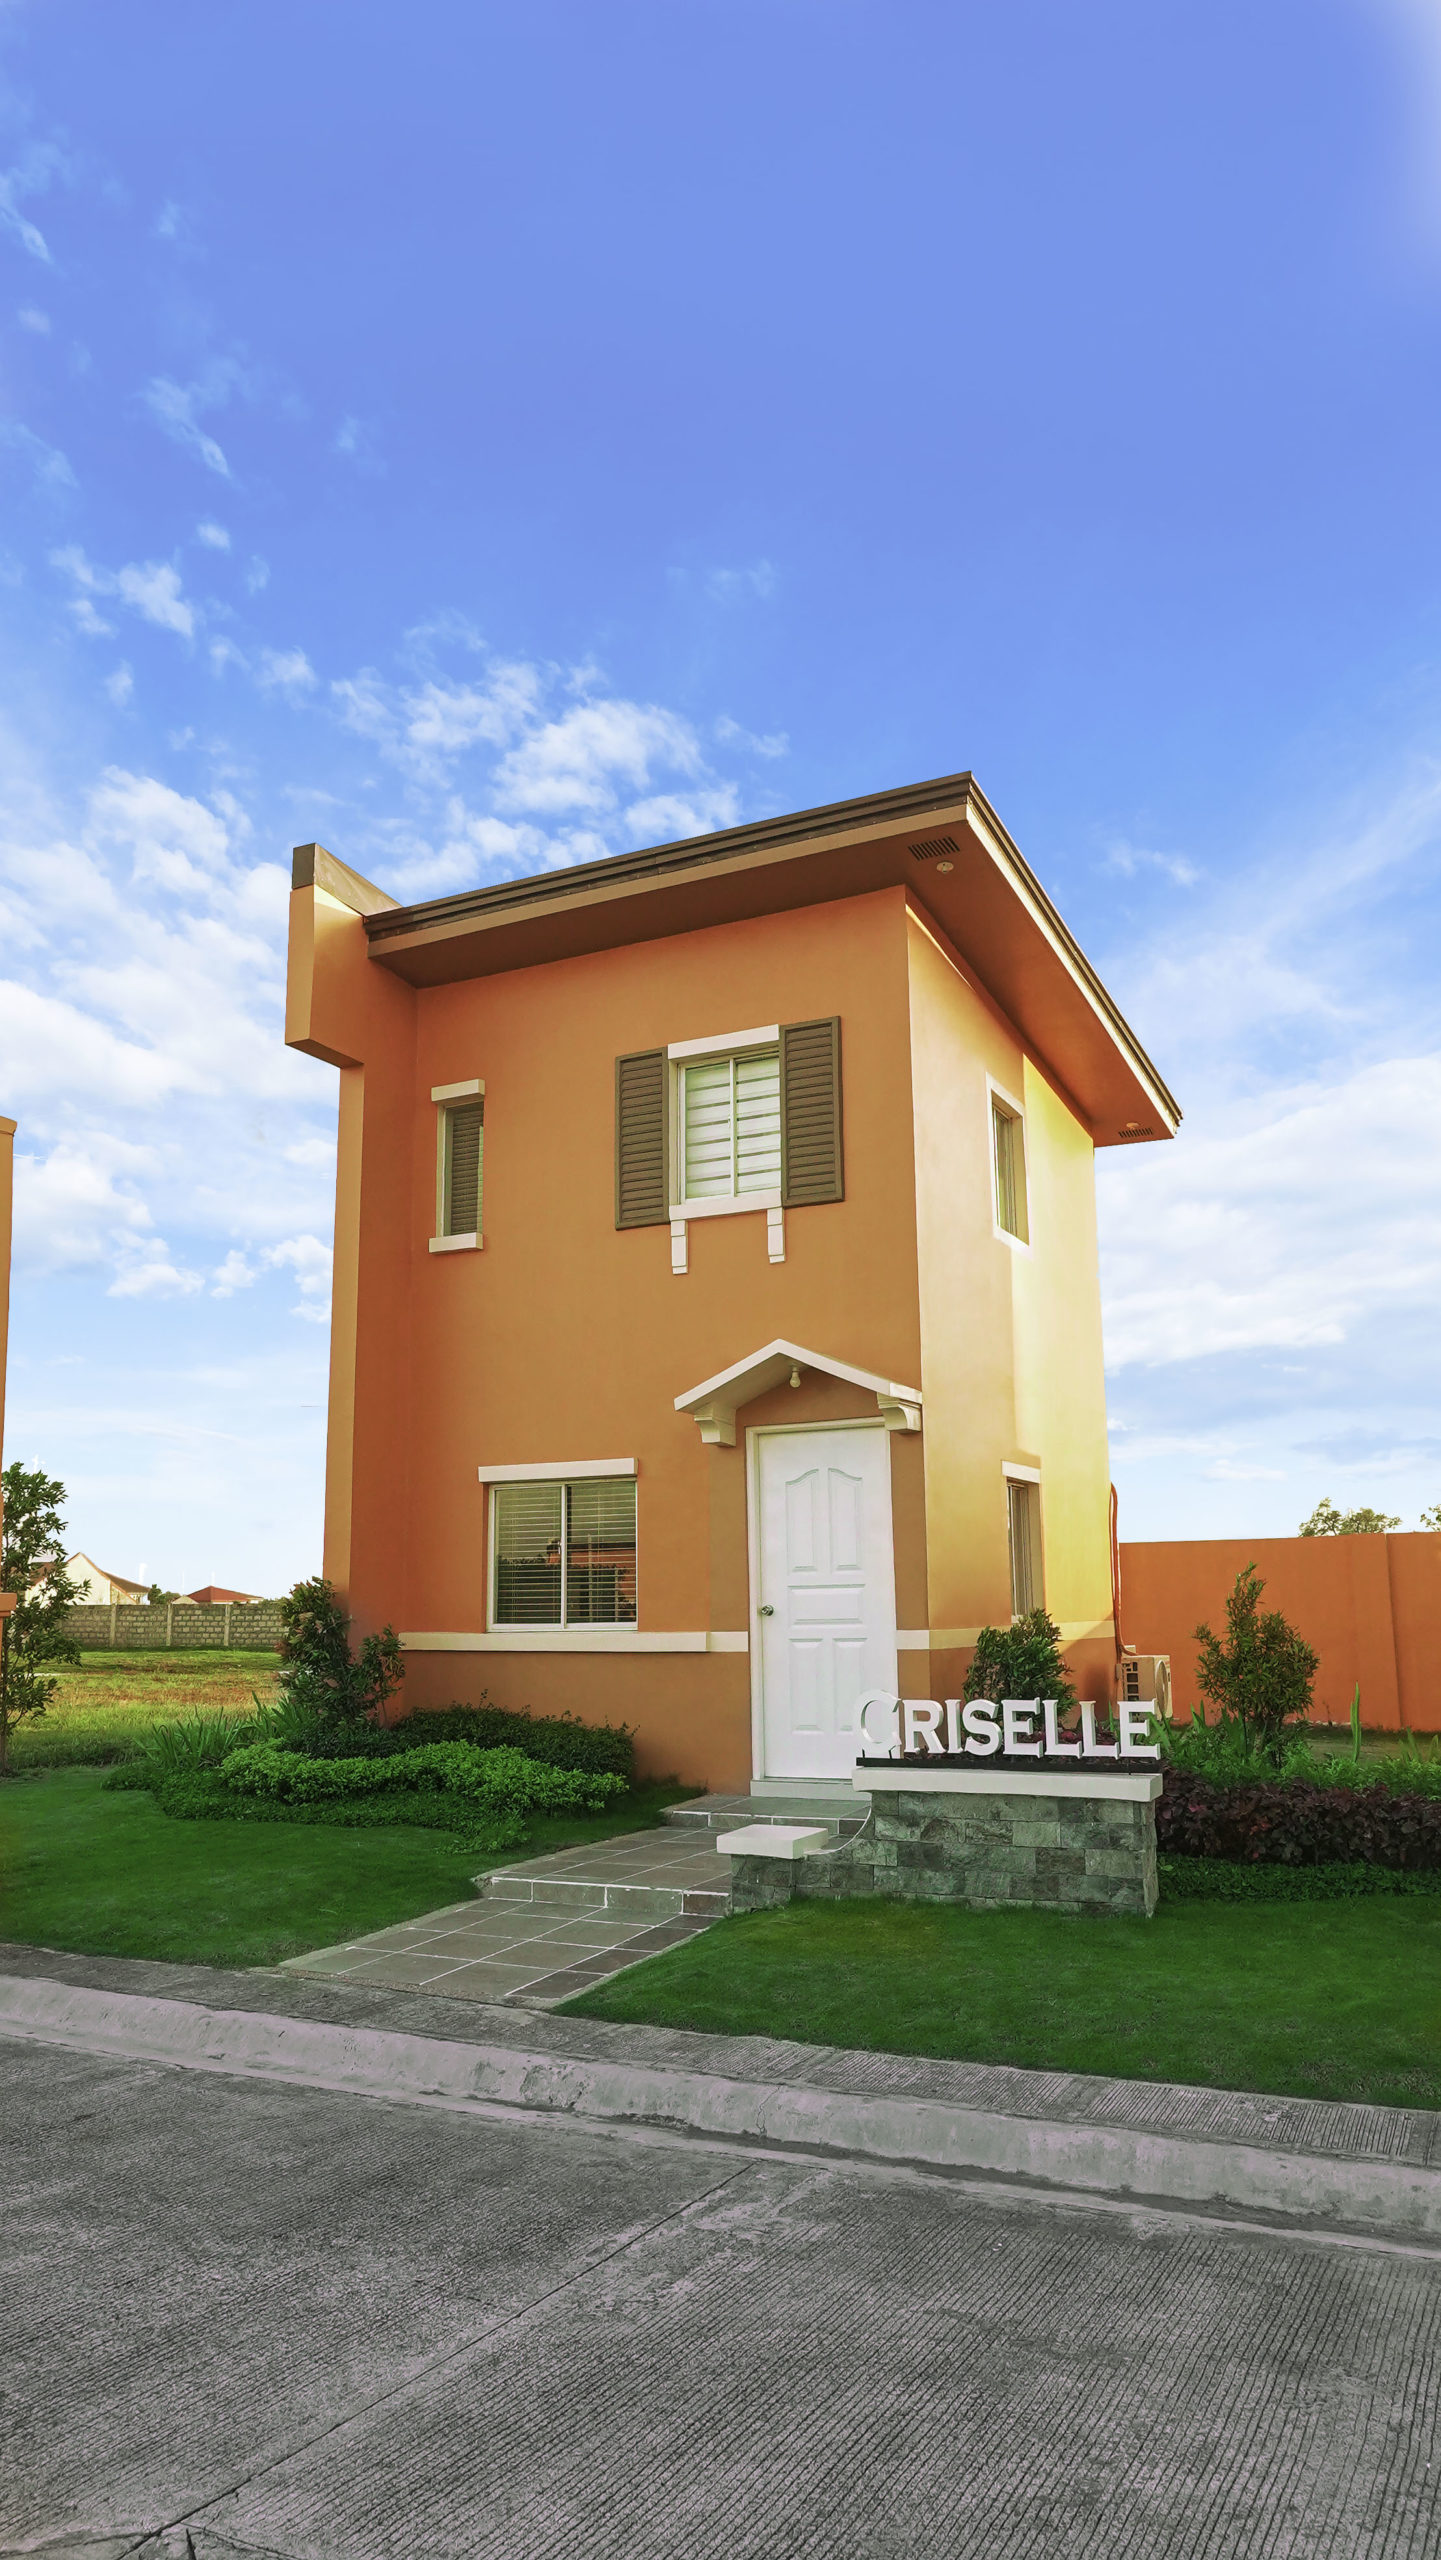 Affordable house and lot in Cabanatauan City Criselle unit 54 Lot area